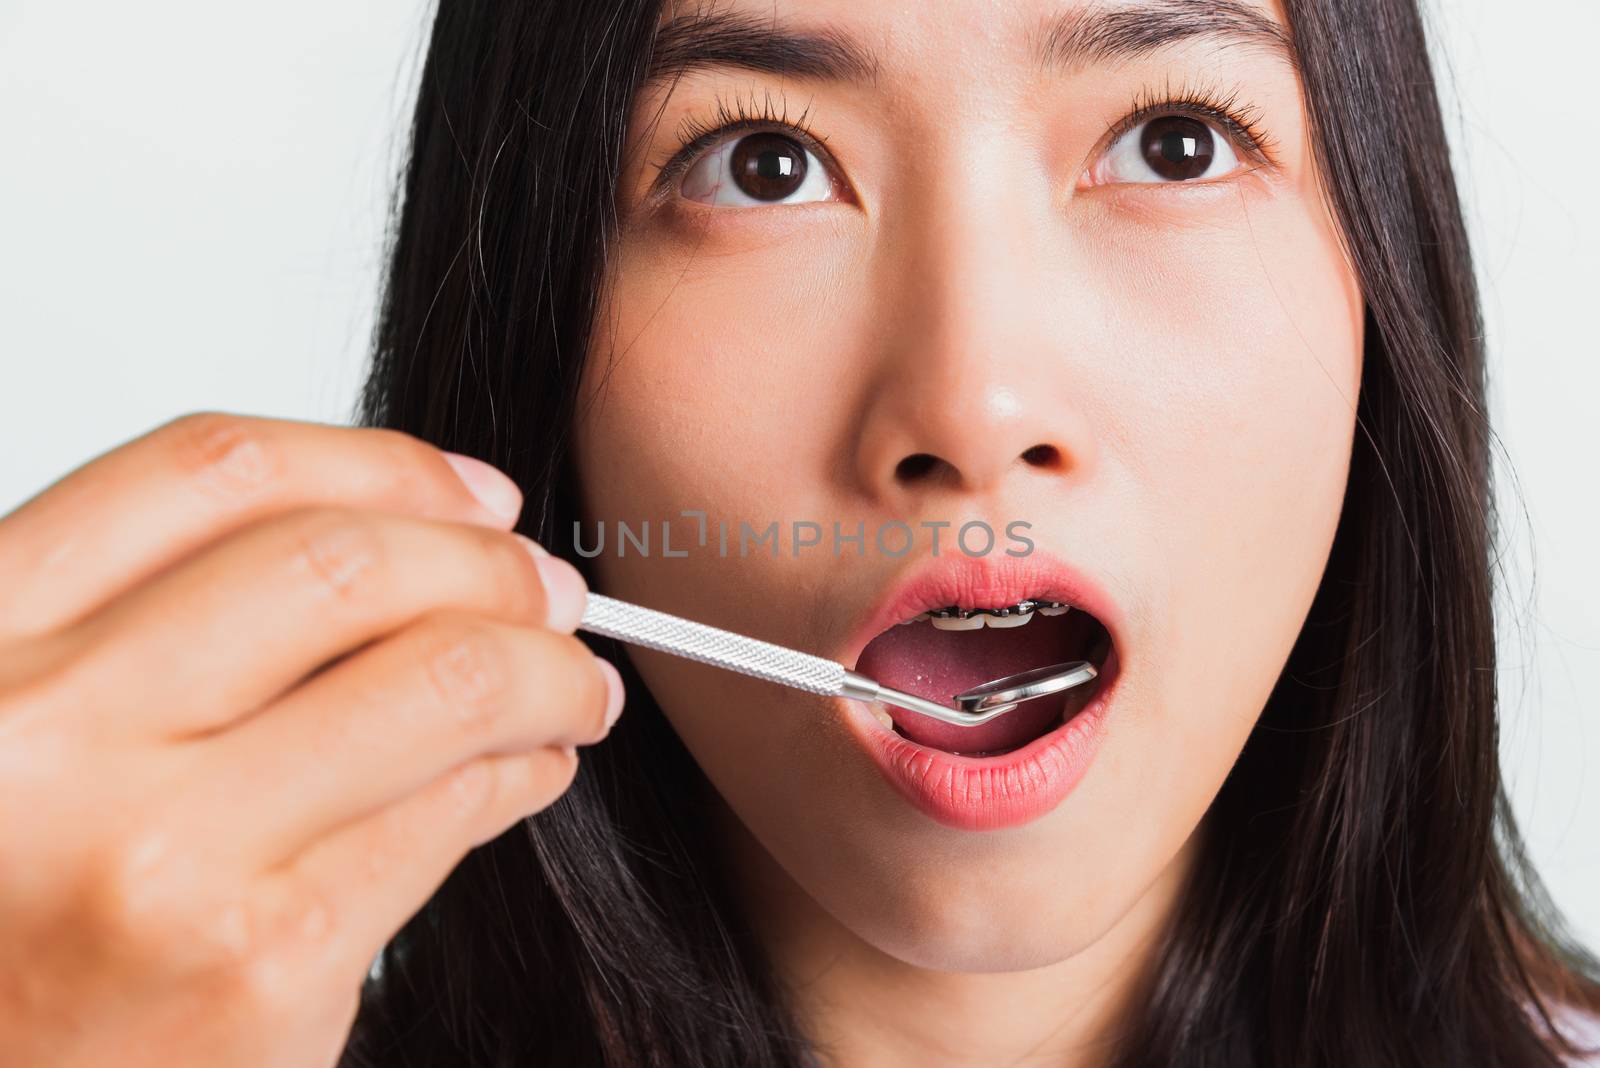 Asian teen beautiful young woman smile have dental braces on teeth laughing and have medical equipment tools for check tooth, isolated on a white background, Medicine and dentistry concept